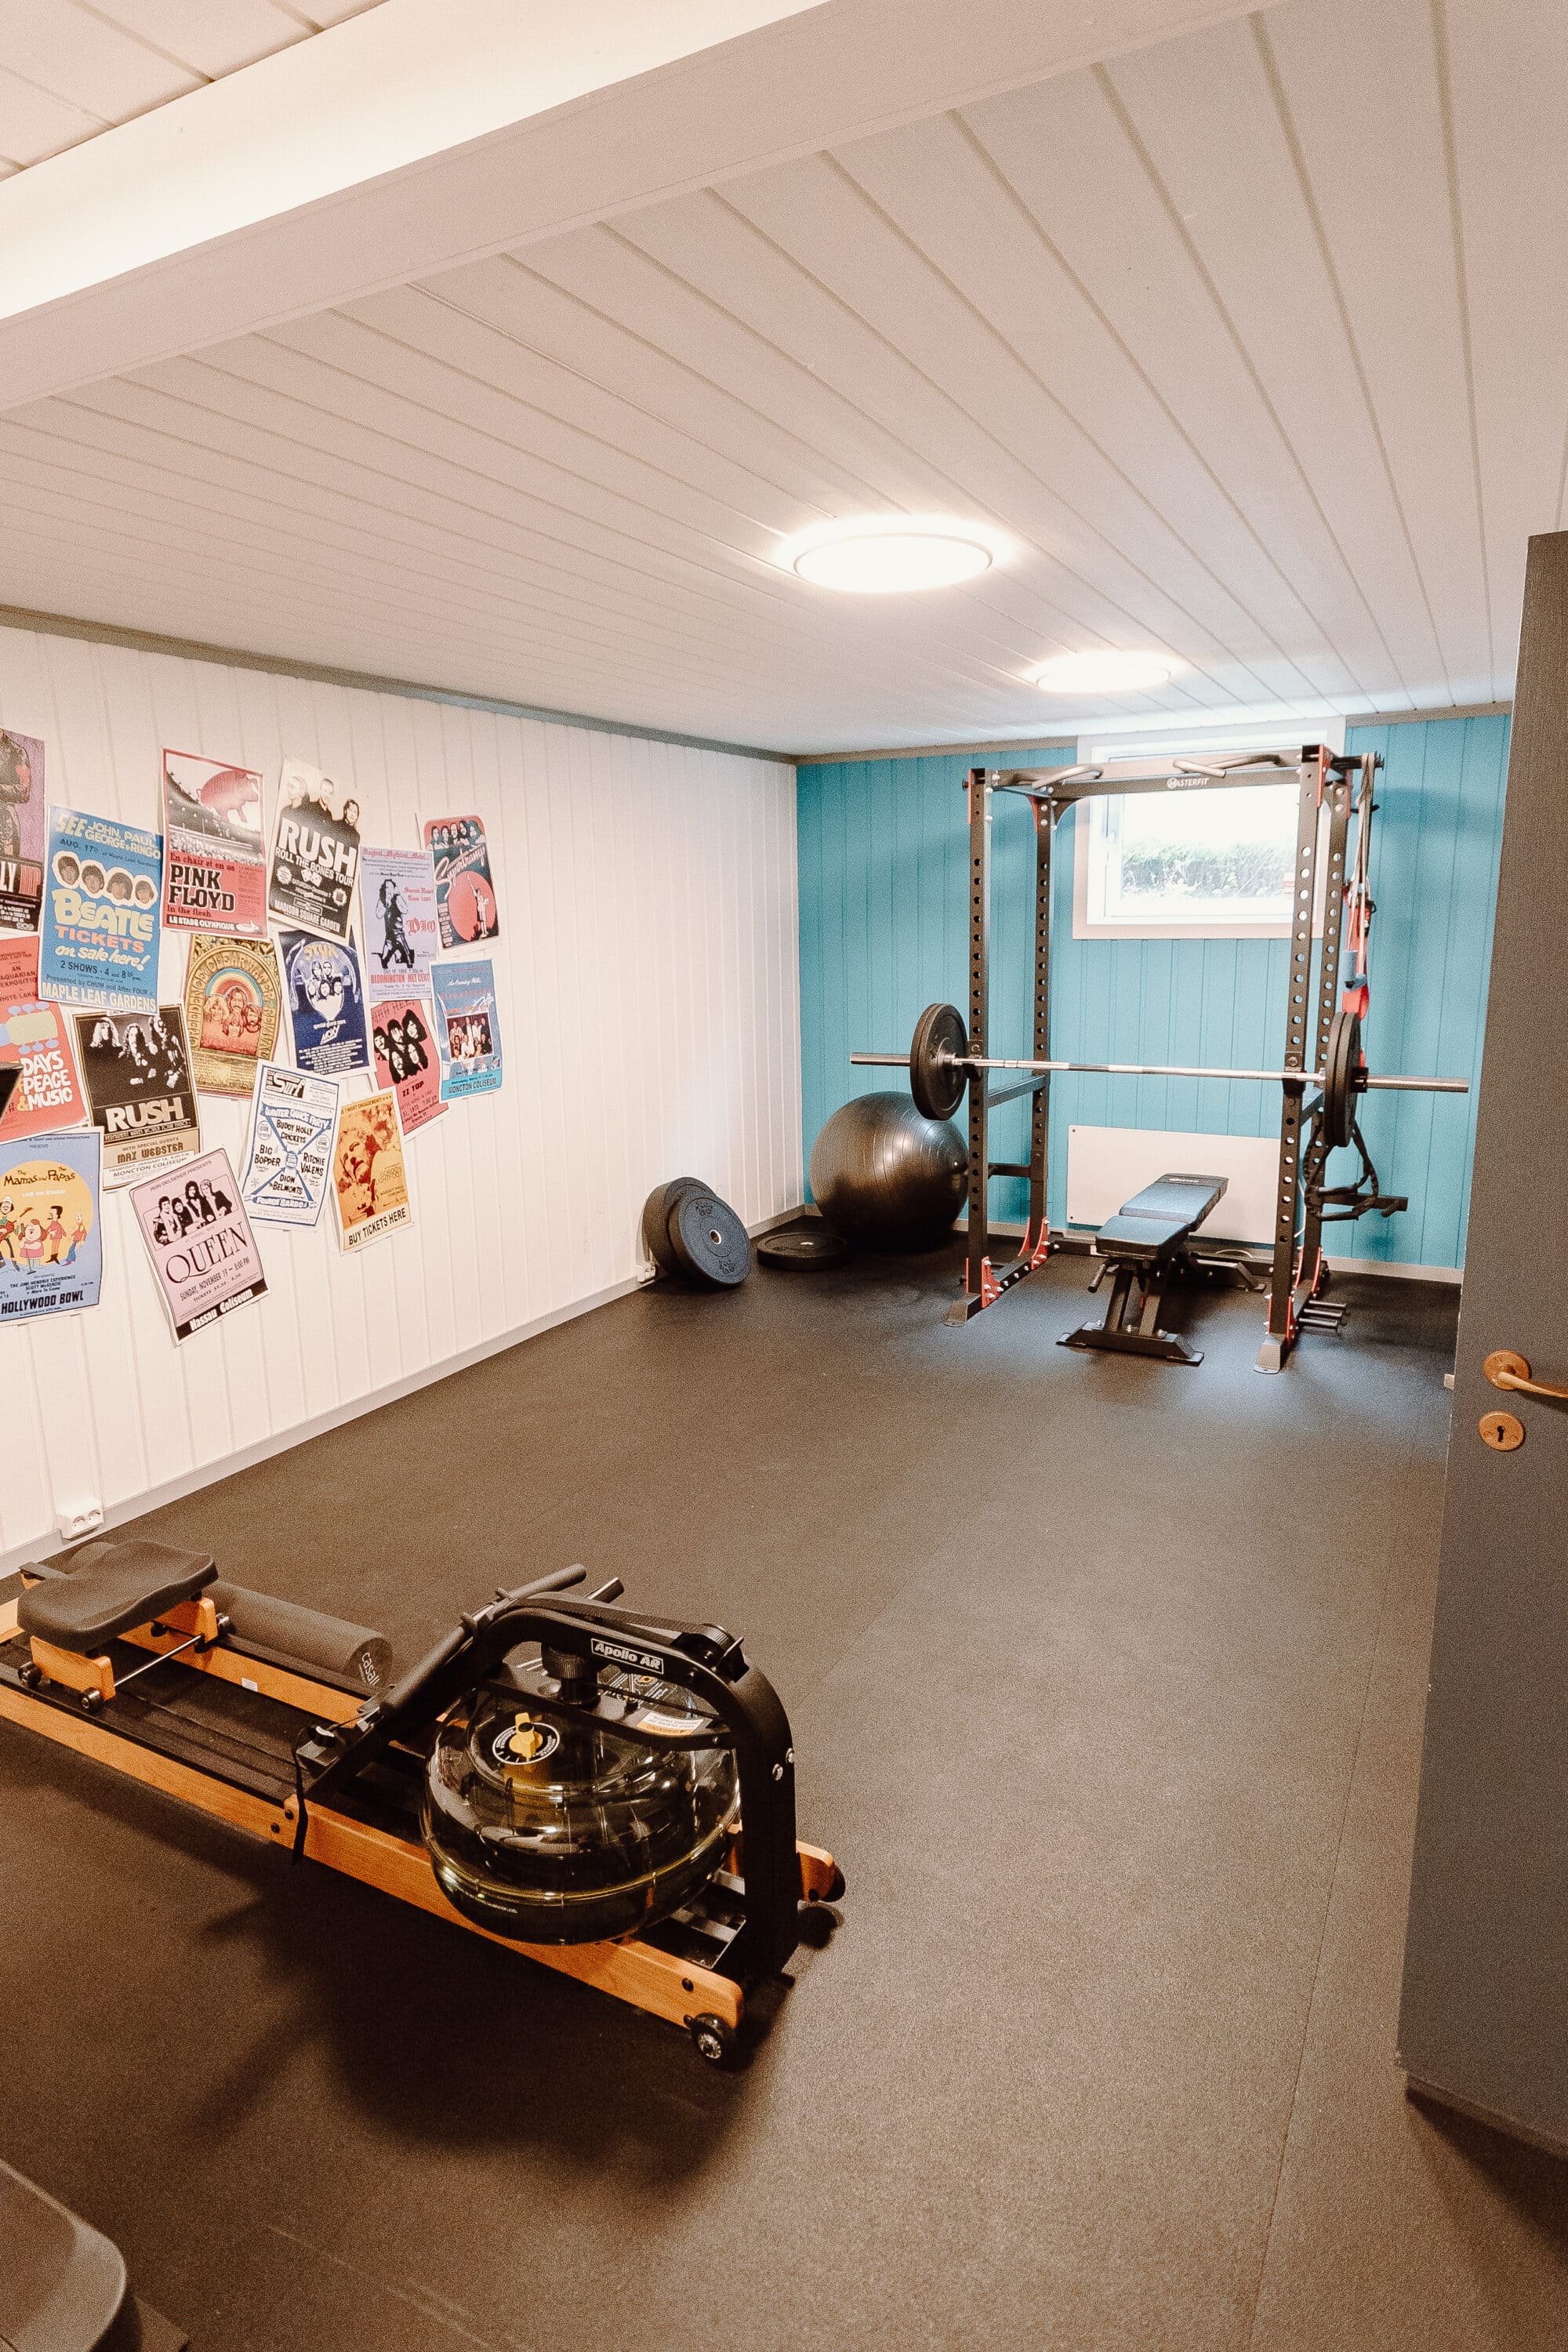 A cool workout space in the basement